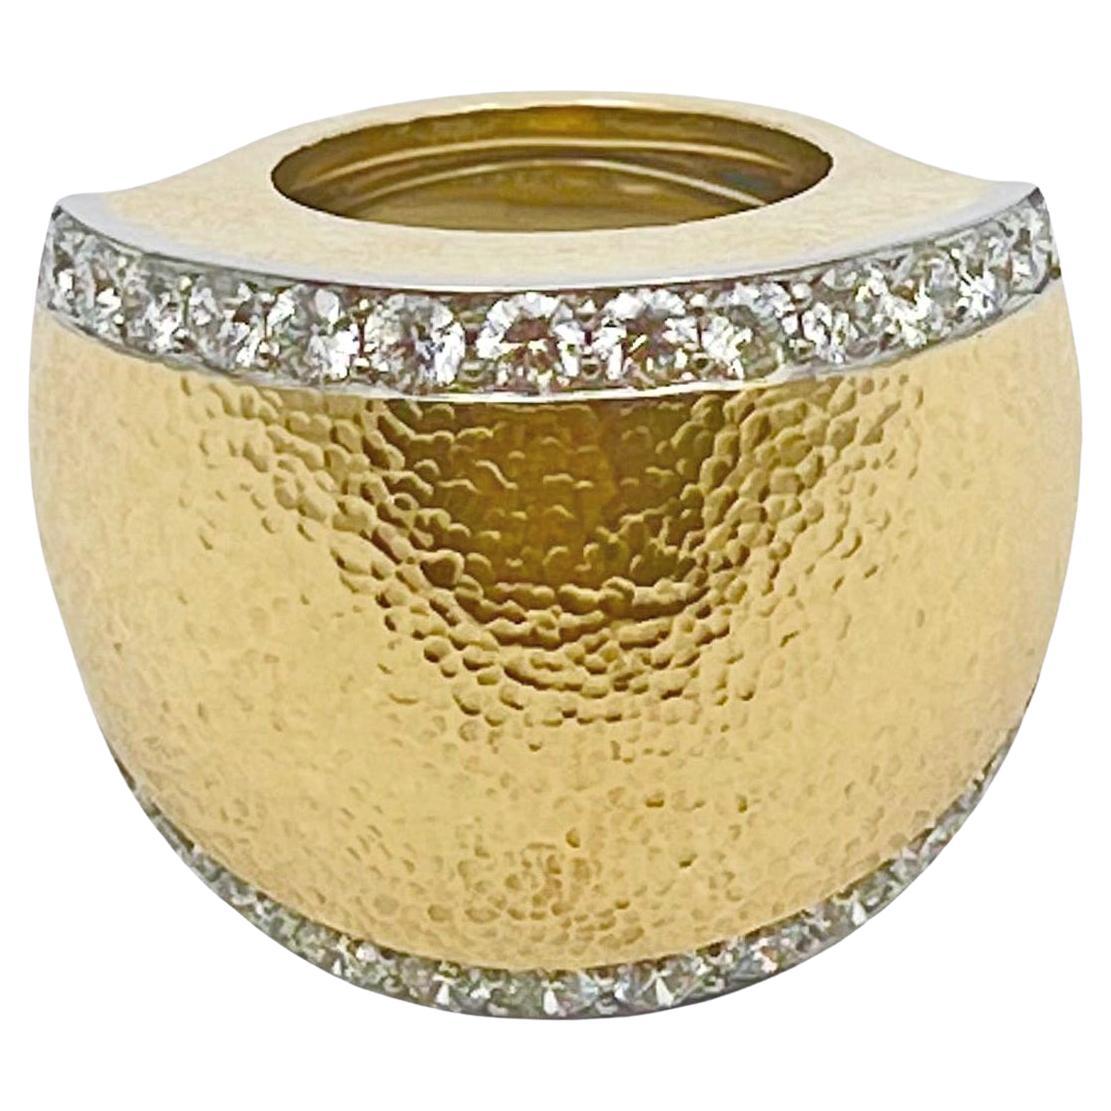 David Webb tapered dome ring in hammered 18k yellow gold with platinum borders on either side accented by round brilliant-cut diamonds.  Twenty-six diamonds weighing approximately 2.60 total carats (G color, VS1-VS2 clarity).  Signed 